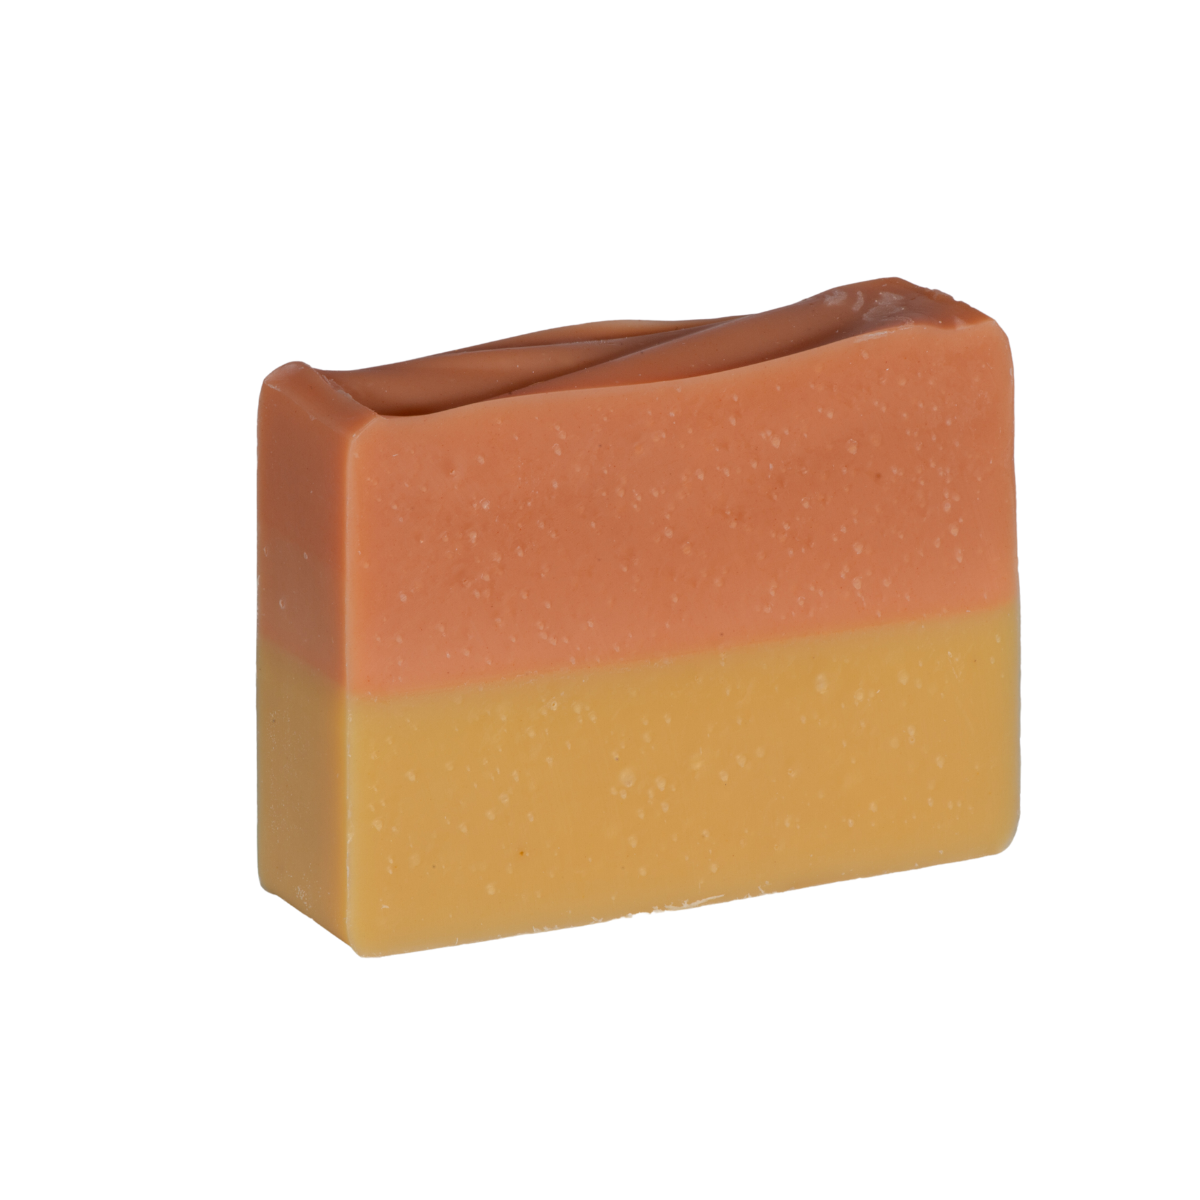 French Pink Clay & Lemongrass Soap Bar by Zero Soap Co.